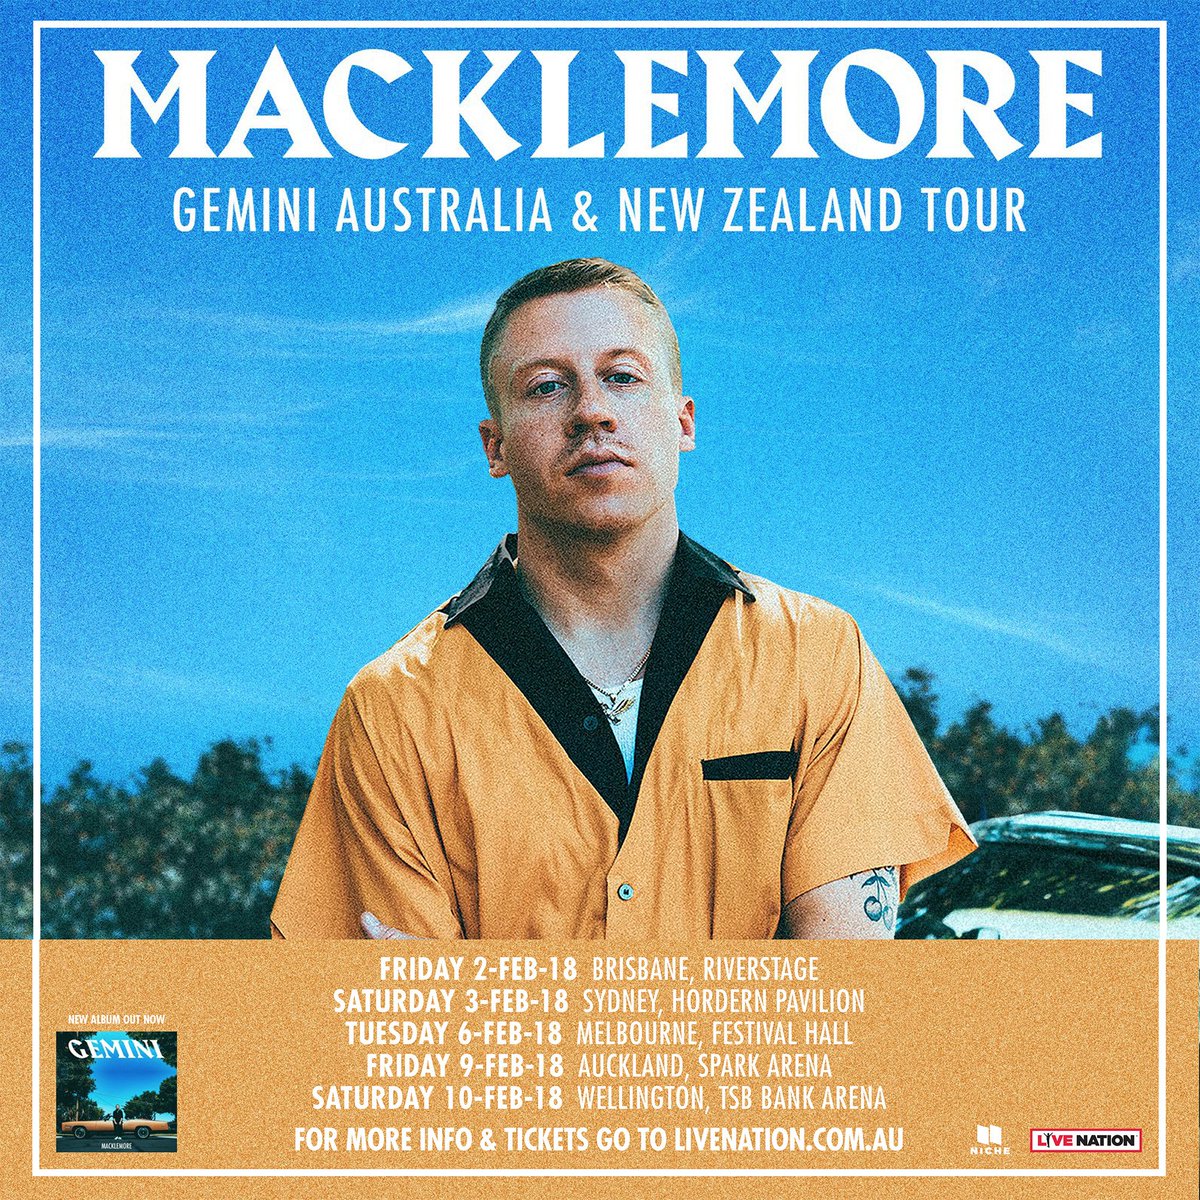 Australia & New Zealand, I'm very excited to see you in February! LETS GO. Details here: https://t.co/YNwA97KCKS https://t.co/8RRke60u53